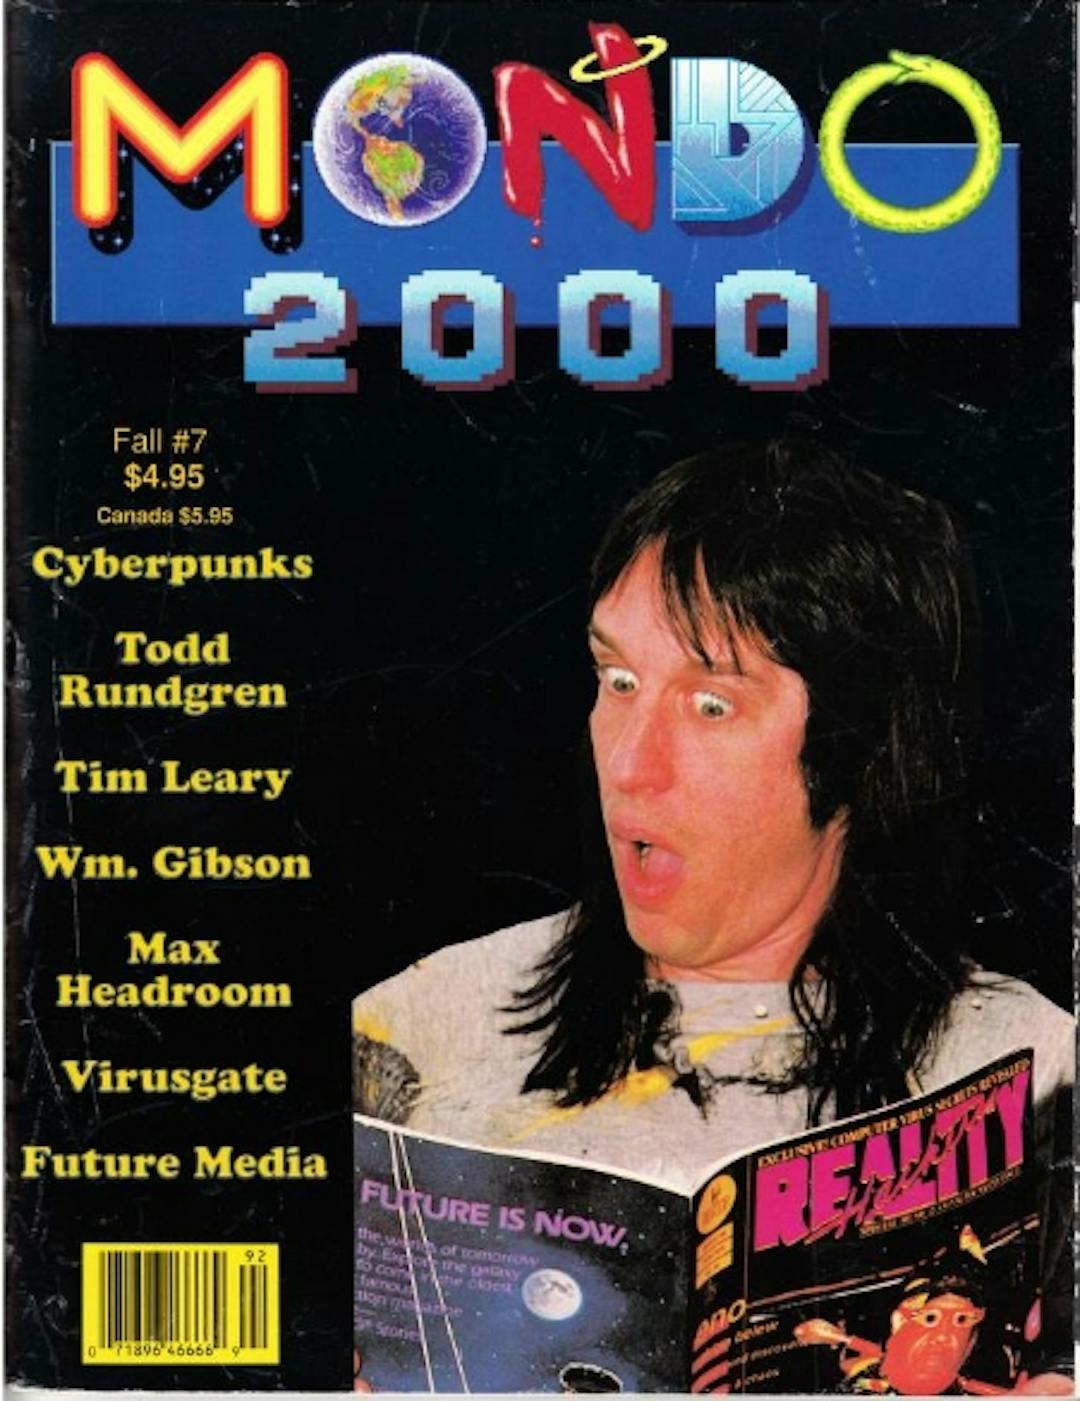 Mondo 2000 Issue 1 available in the Internet Archive